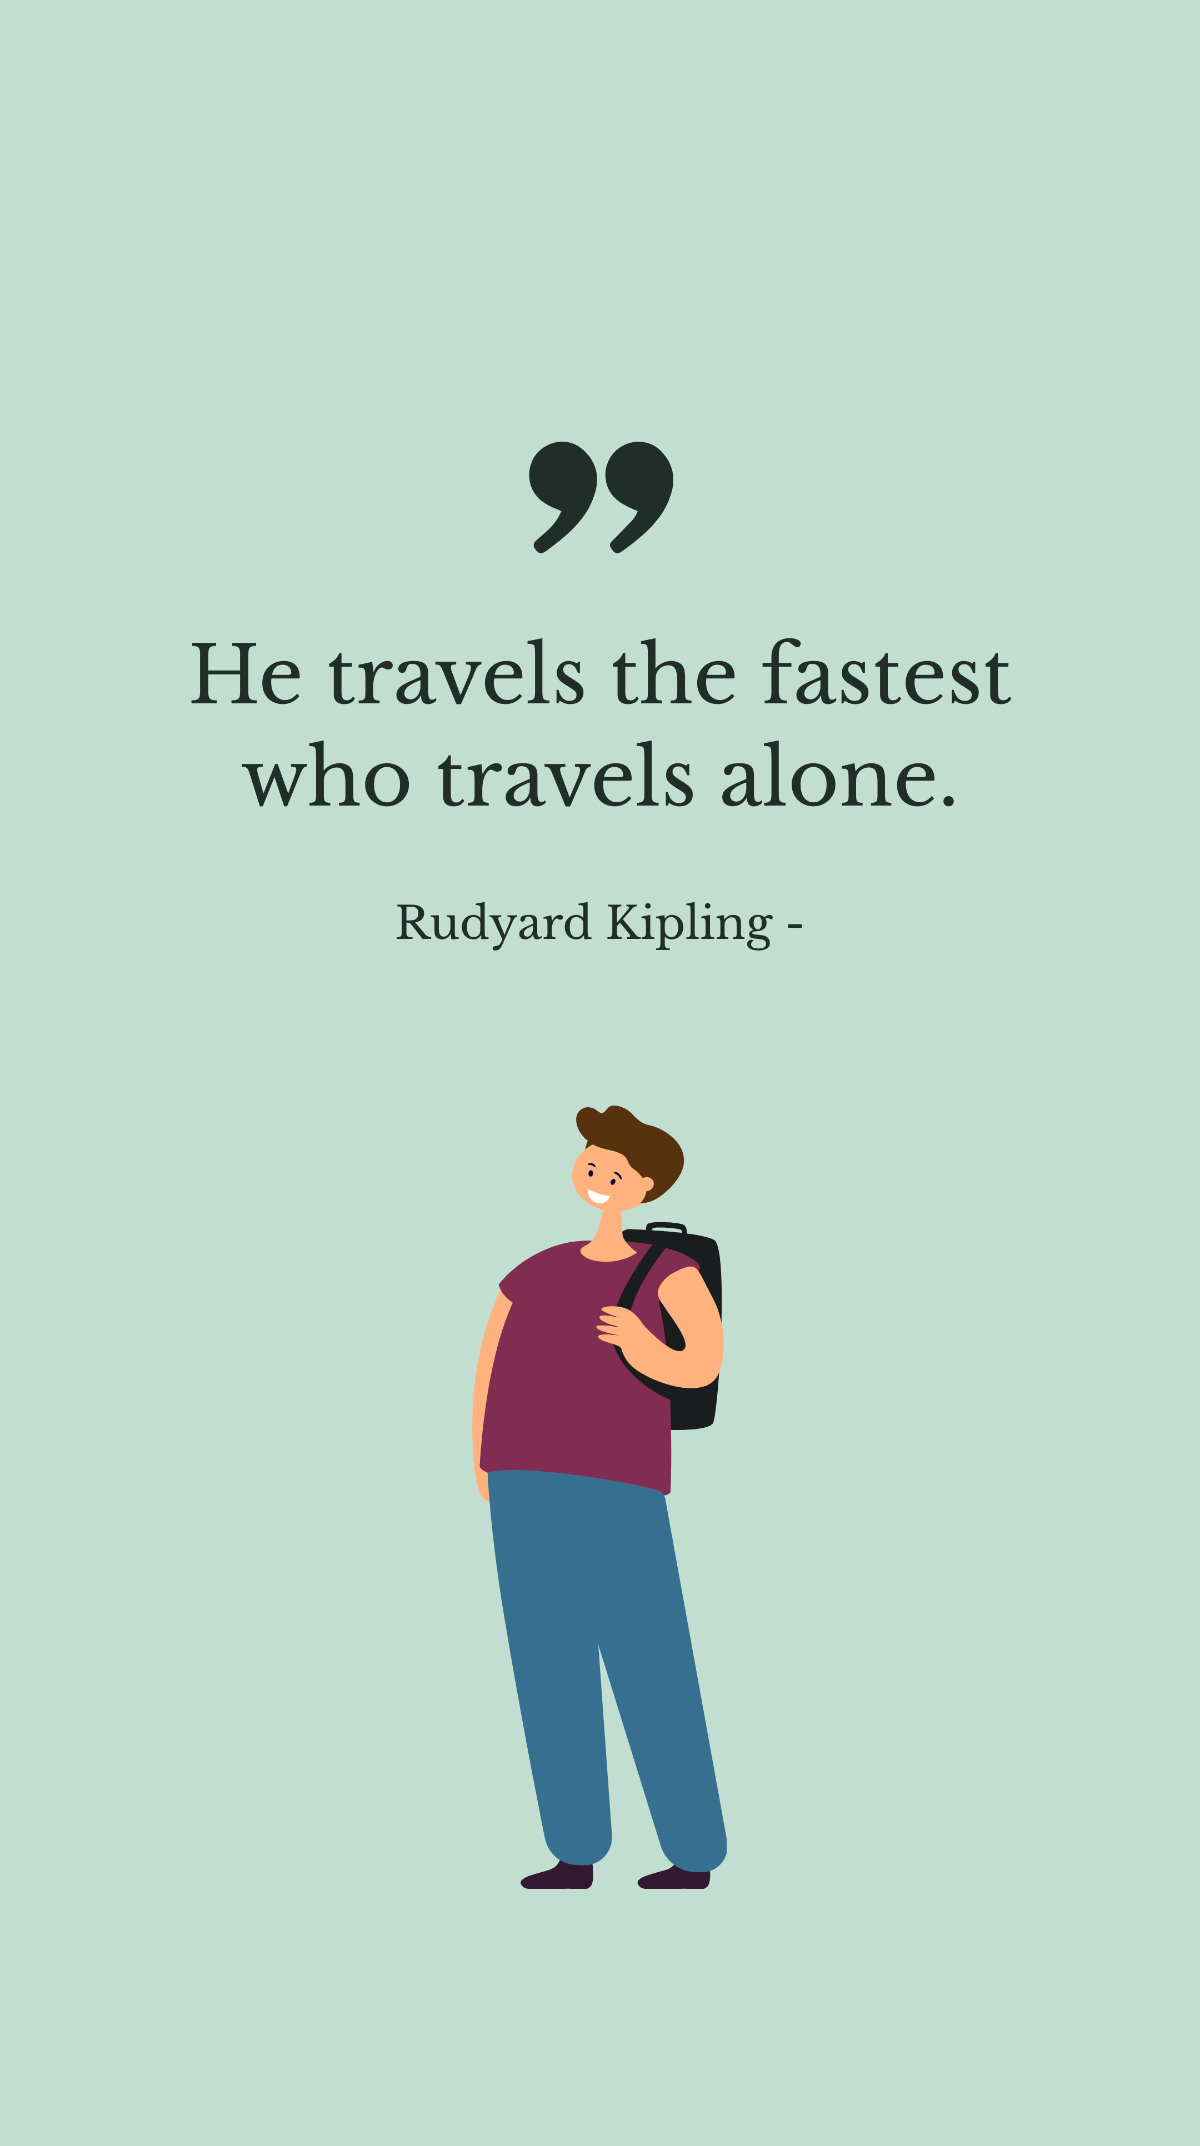 Rudyard Kipling - He travels the fastest who travels alone. Template